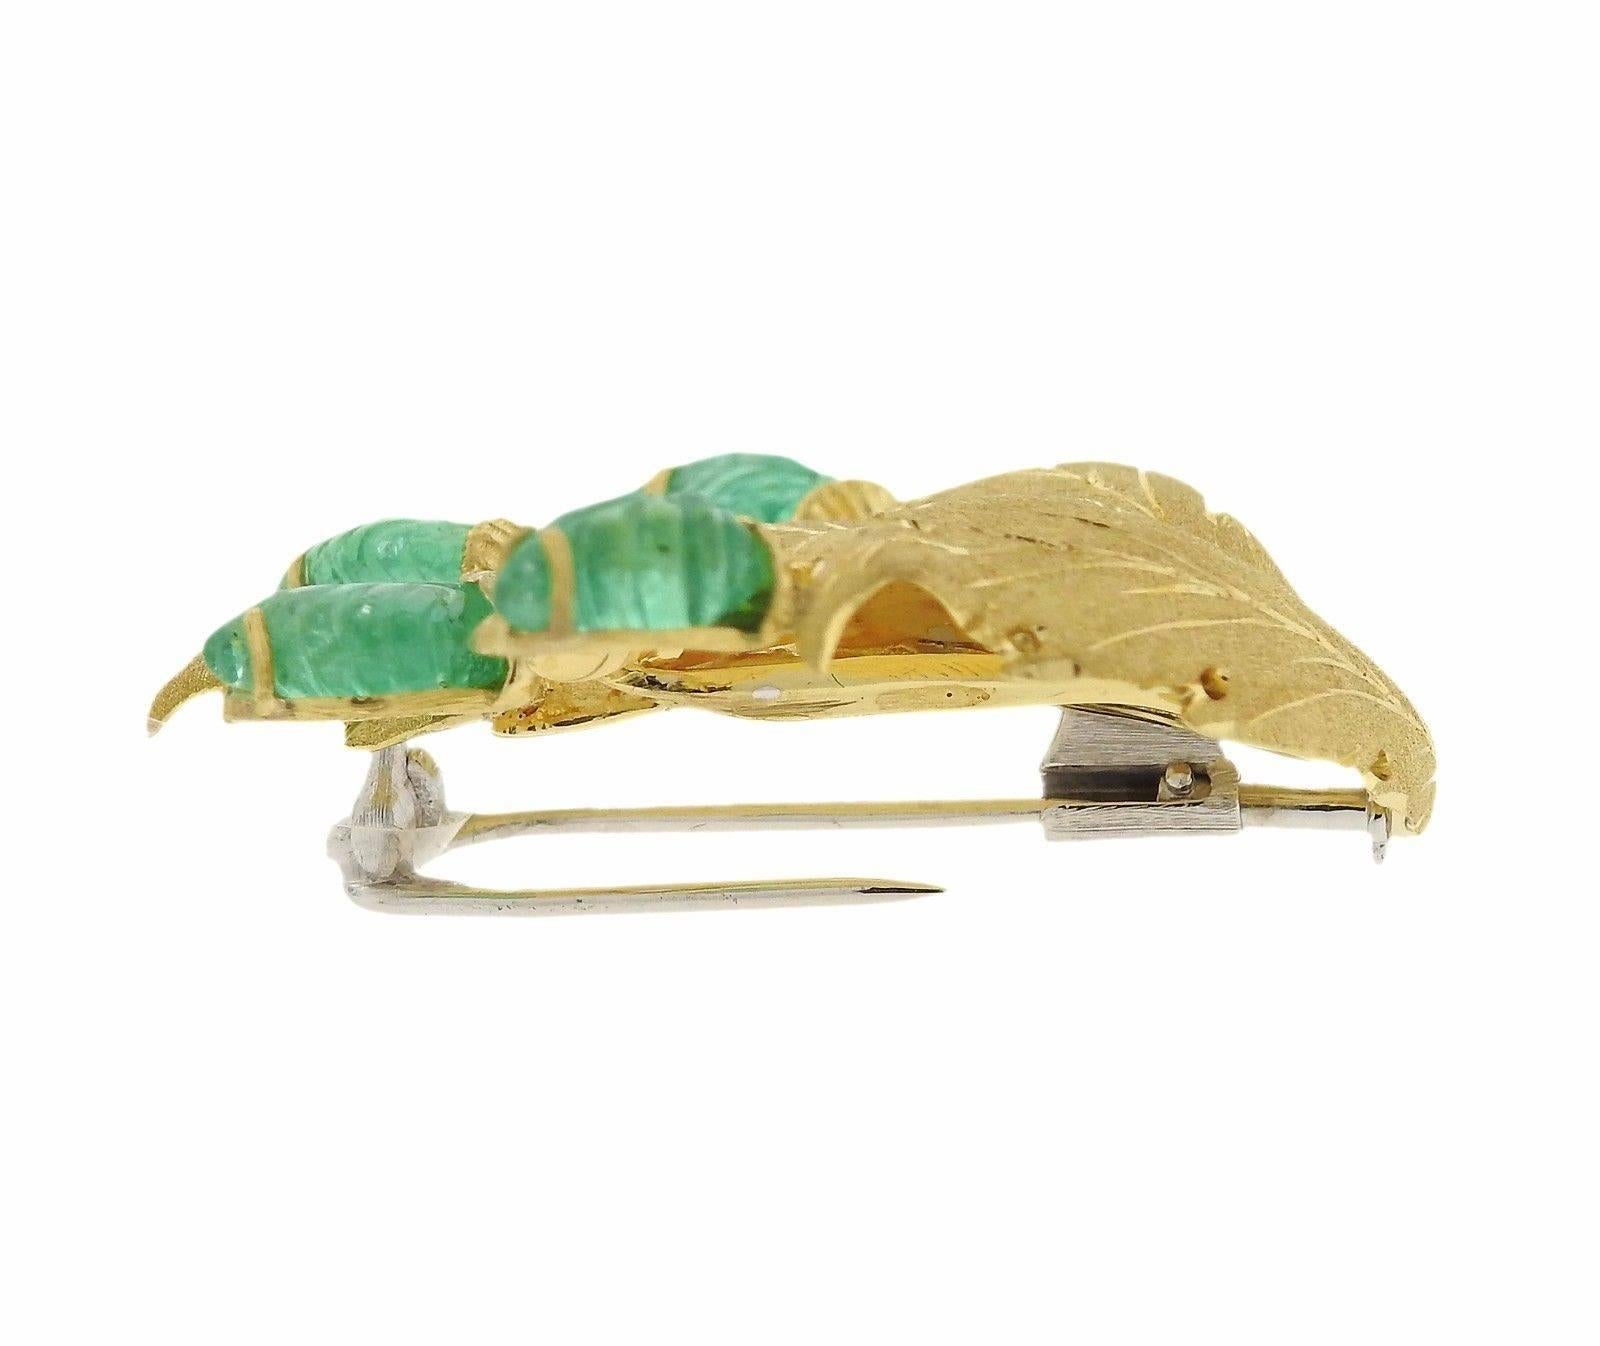 An 18k gold brooch set with carved emerald leaves.  The brooch measures 37mm x 38mm and weighs 10.1 grams.  Marked: 18K, Italy, Buccellati.  The brooch comes with a Buccellati box and papers.  The retail for this piece is $12340.